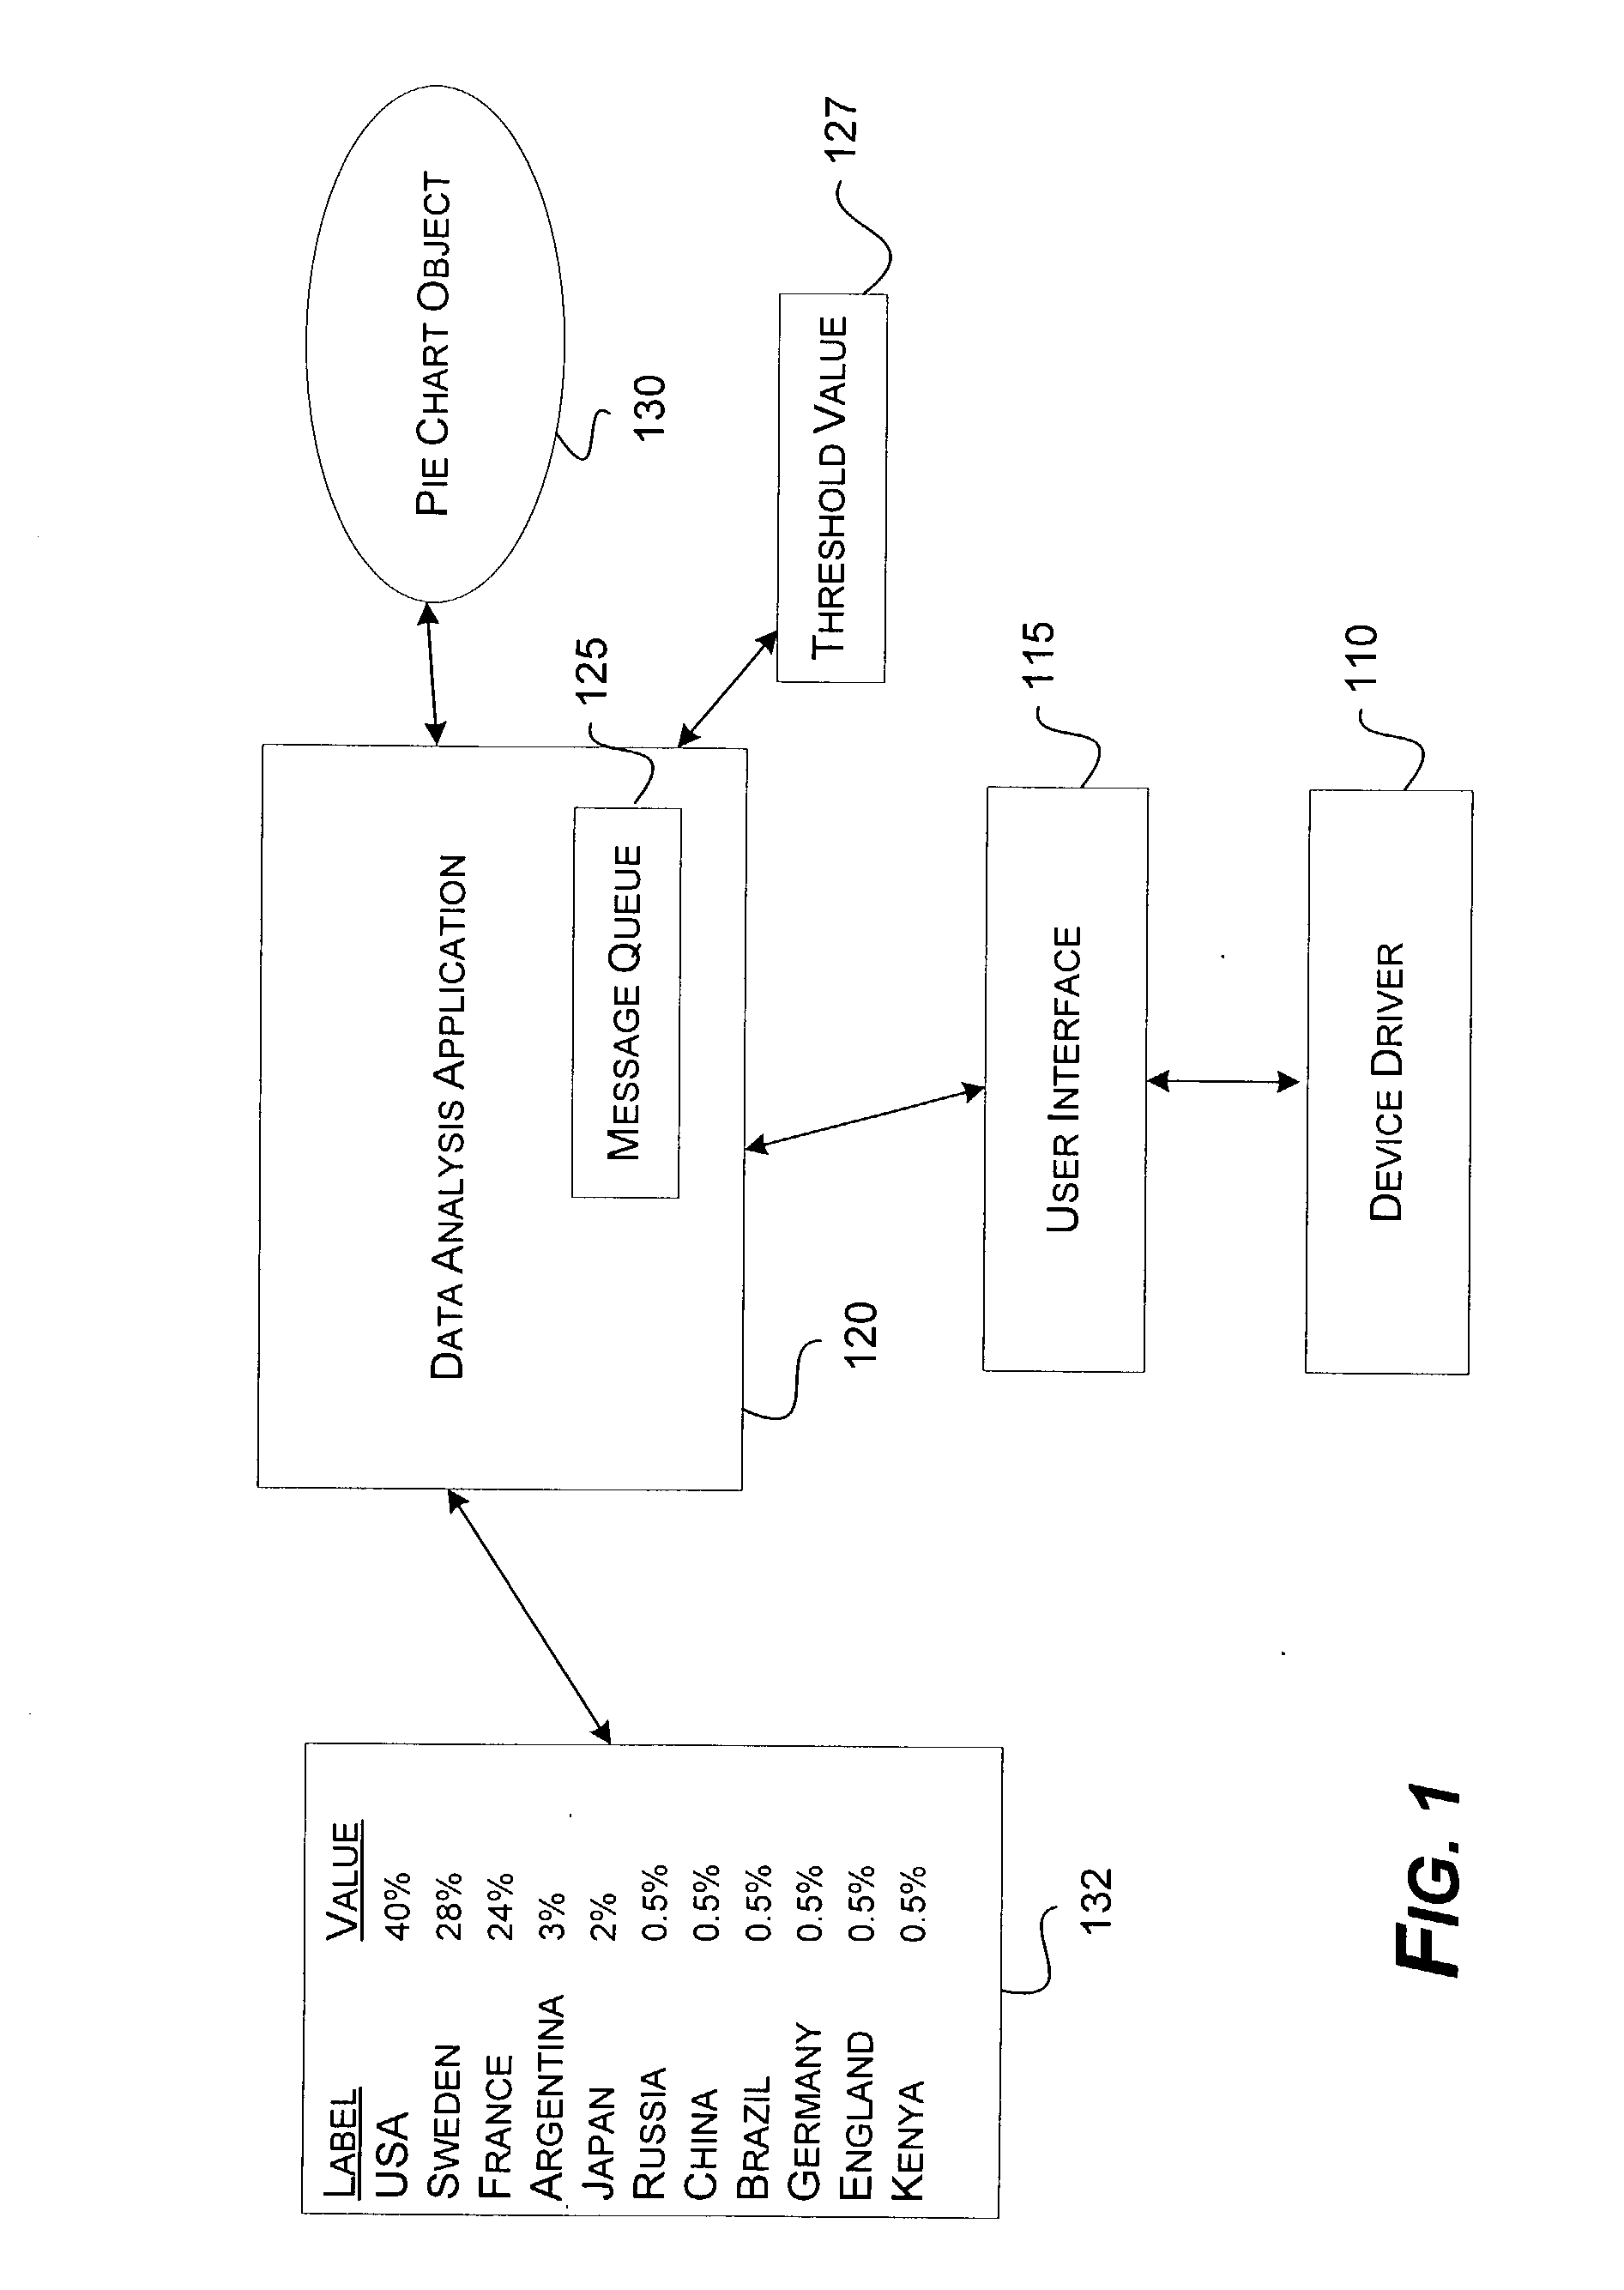 System and method for interactive grouping of pie chart slices